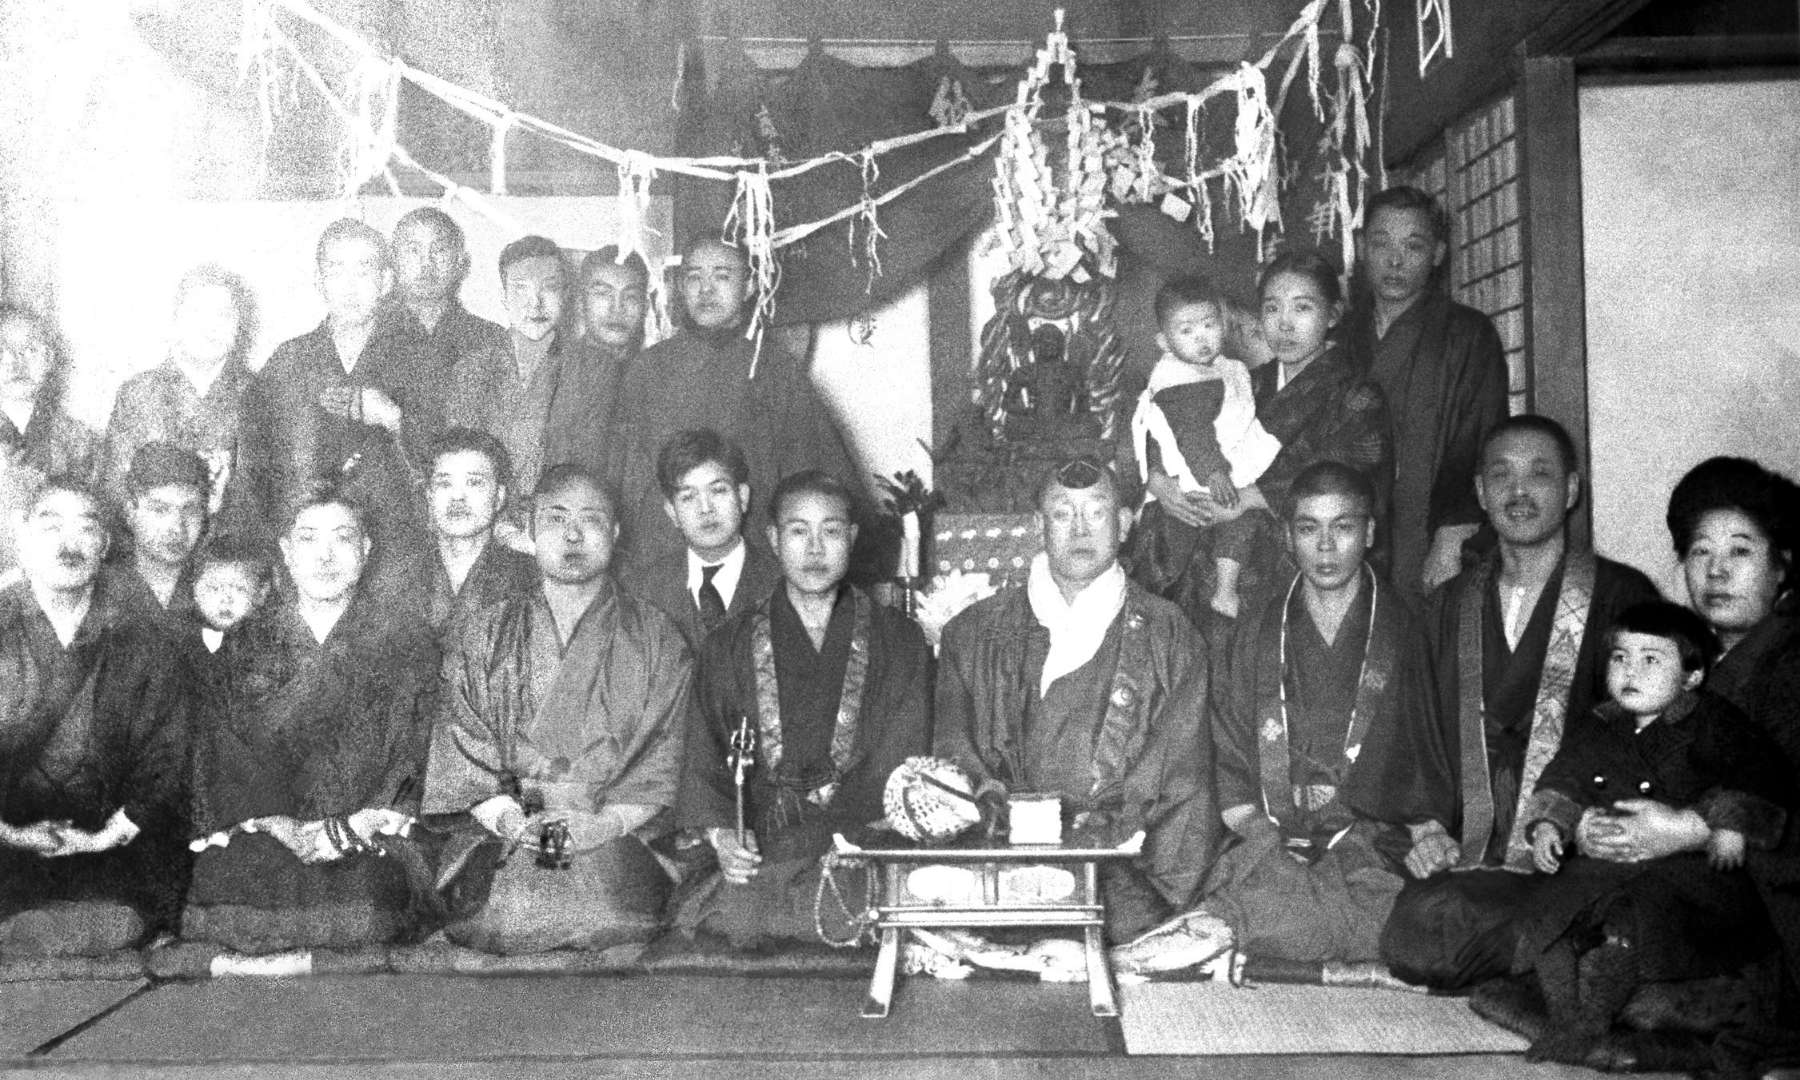 A group portrait in a temple space in which Shinjo, wearing Dharma robes, sits to the right of the officiating priest, Tomoji stands behind them holding infant Chibun.